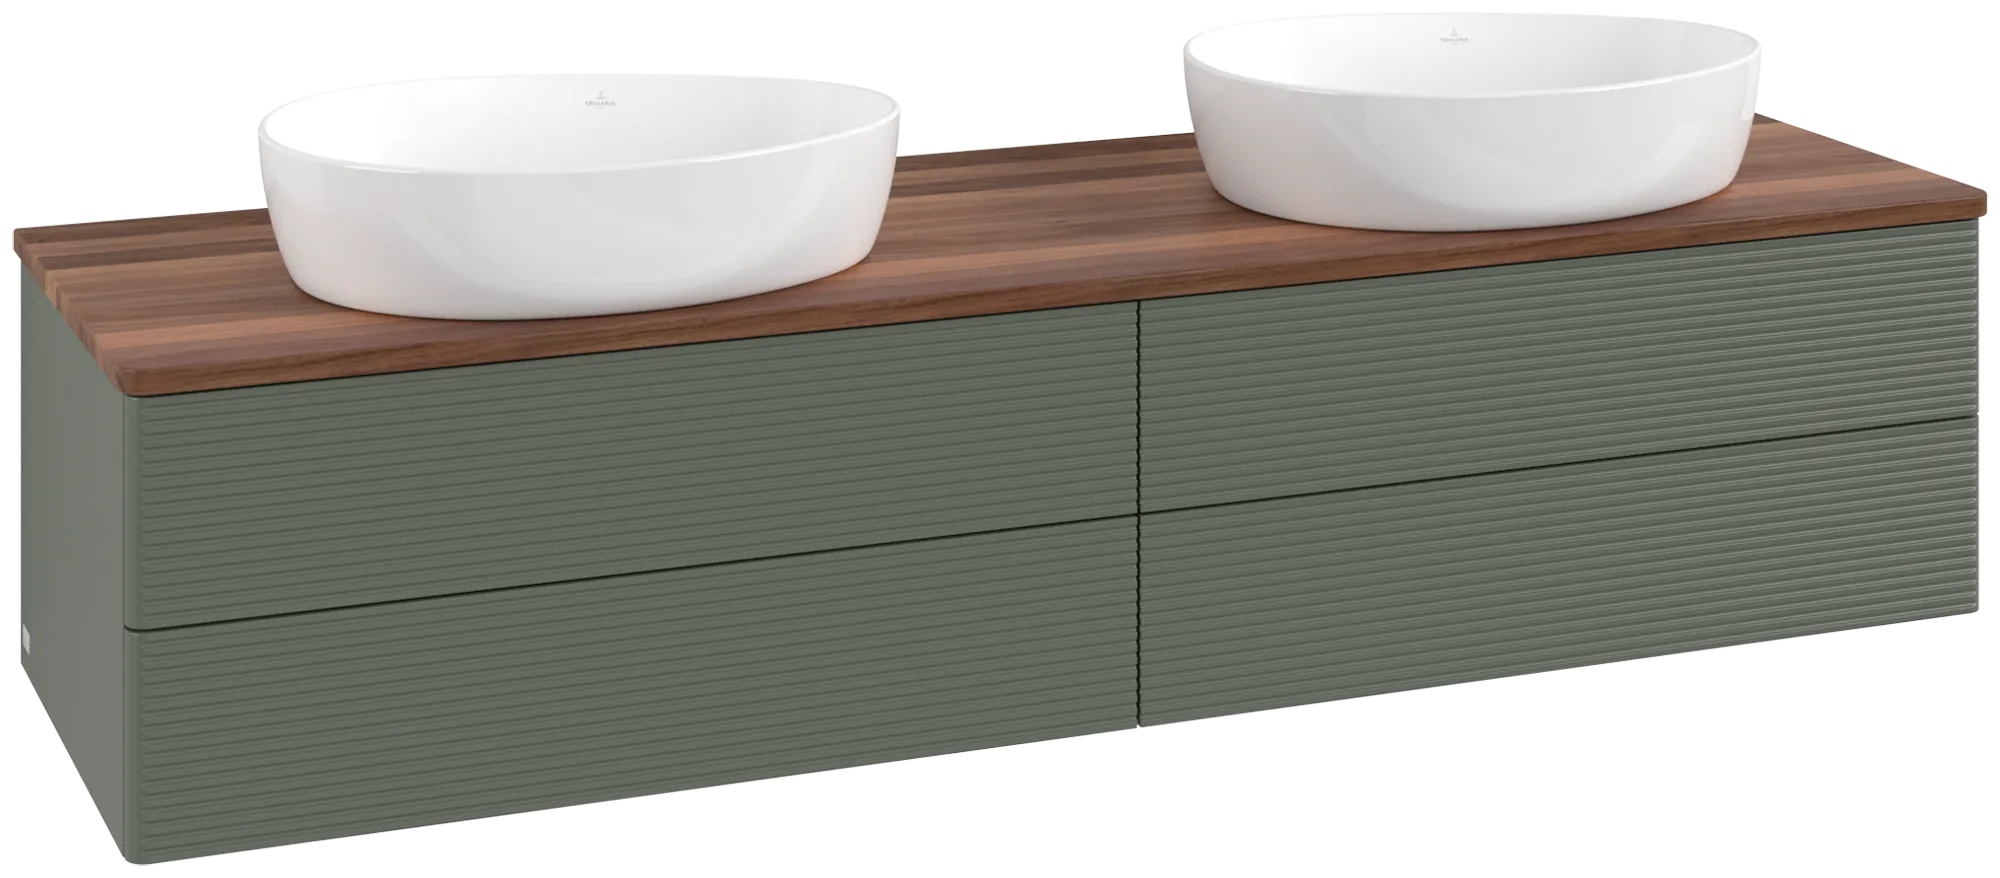 Picture of VILLEROY BOCH Antao Vanity unit, with lighting, 4 pull-out compartments, 1600 x 360 x 500 mm, Front with grain texture, Leaf Green Matt Lacquer / Warm Walnut #L28112HL